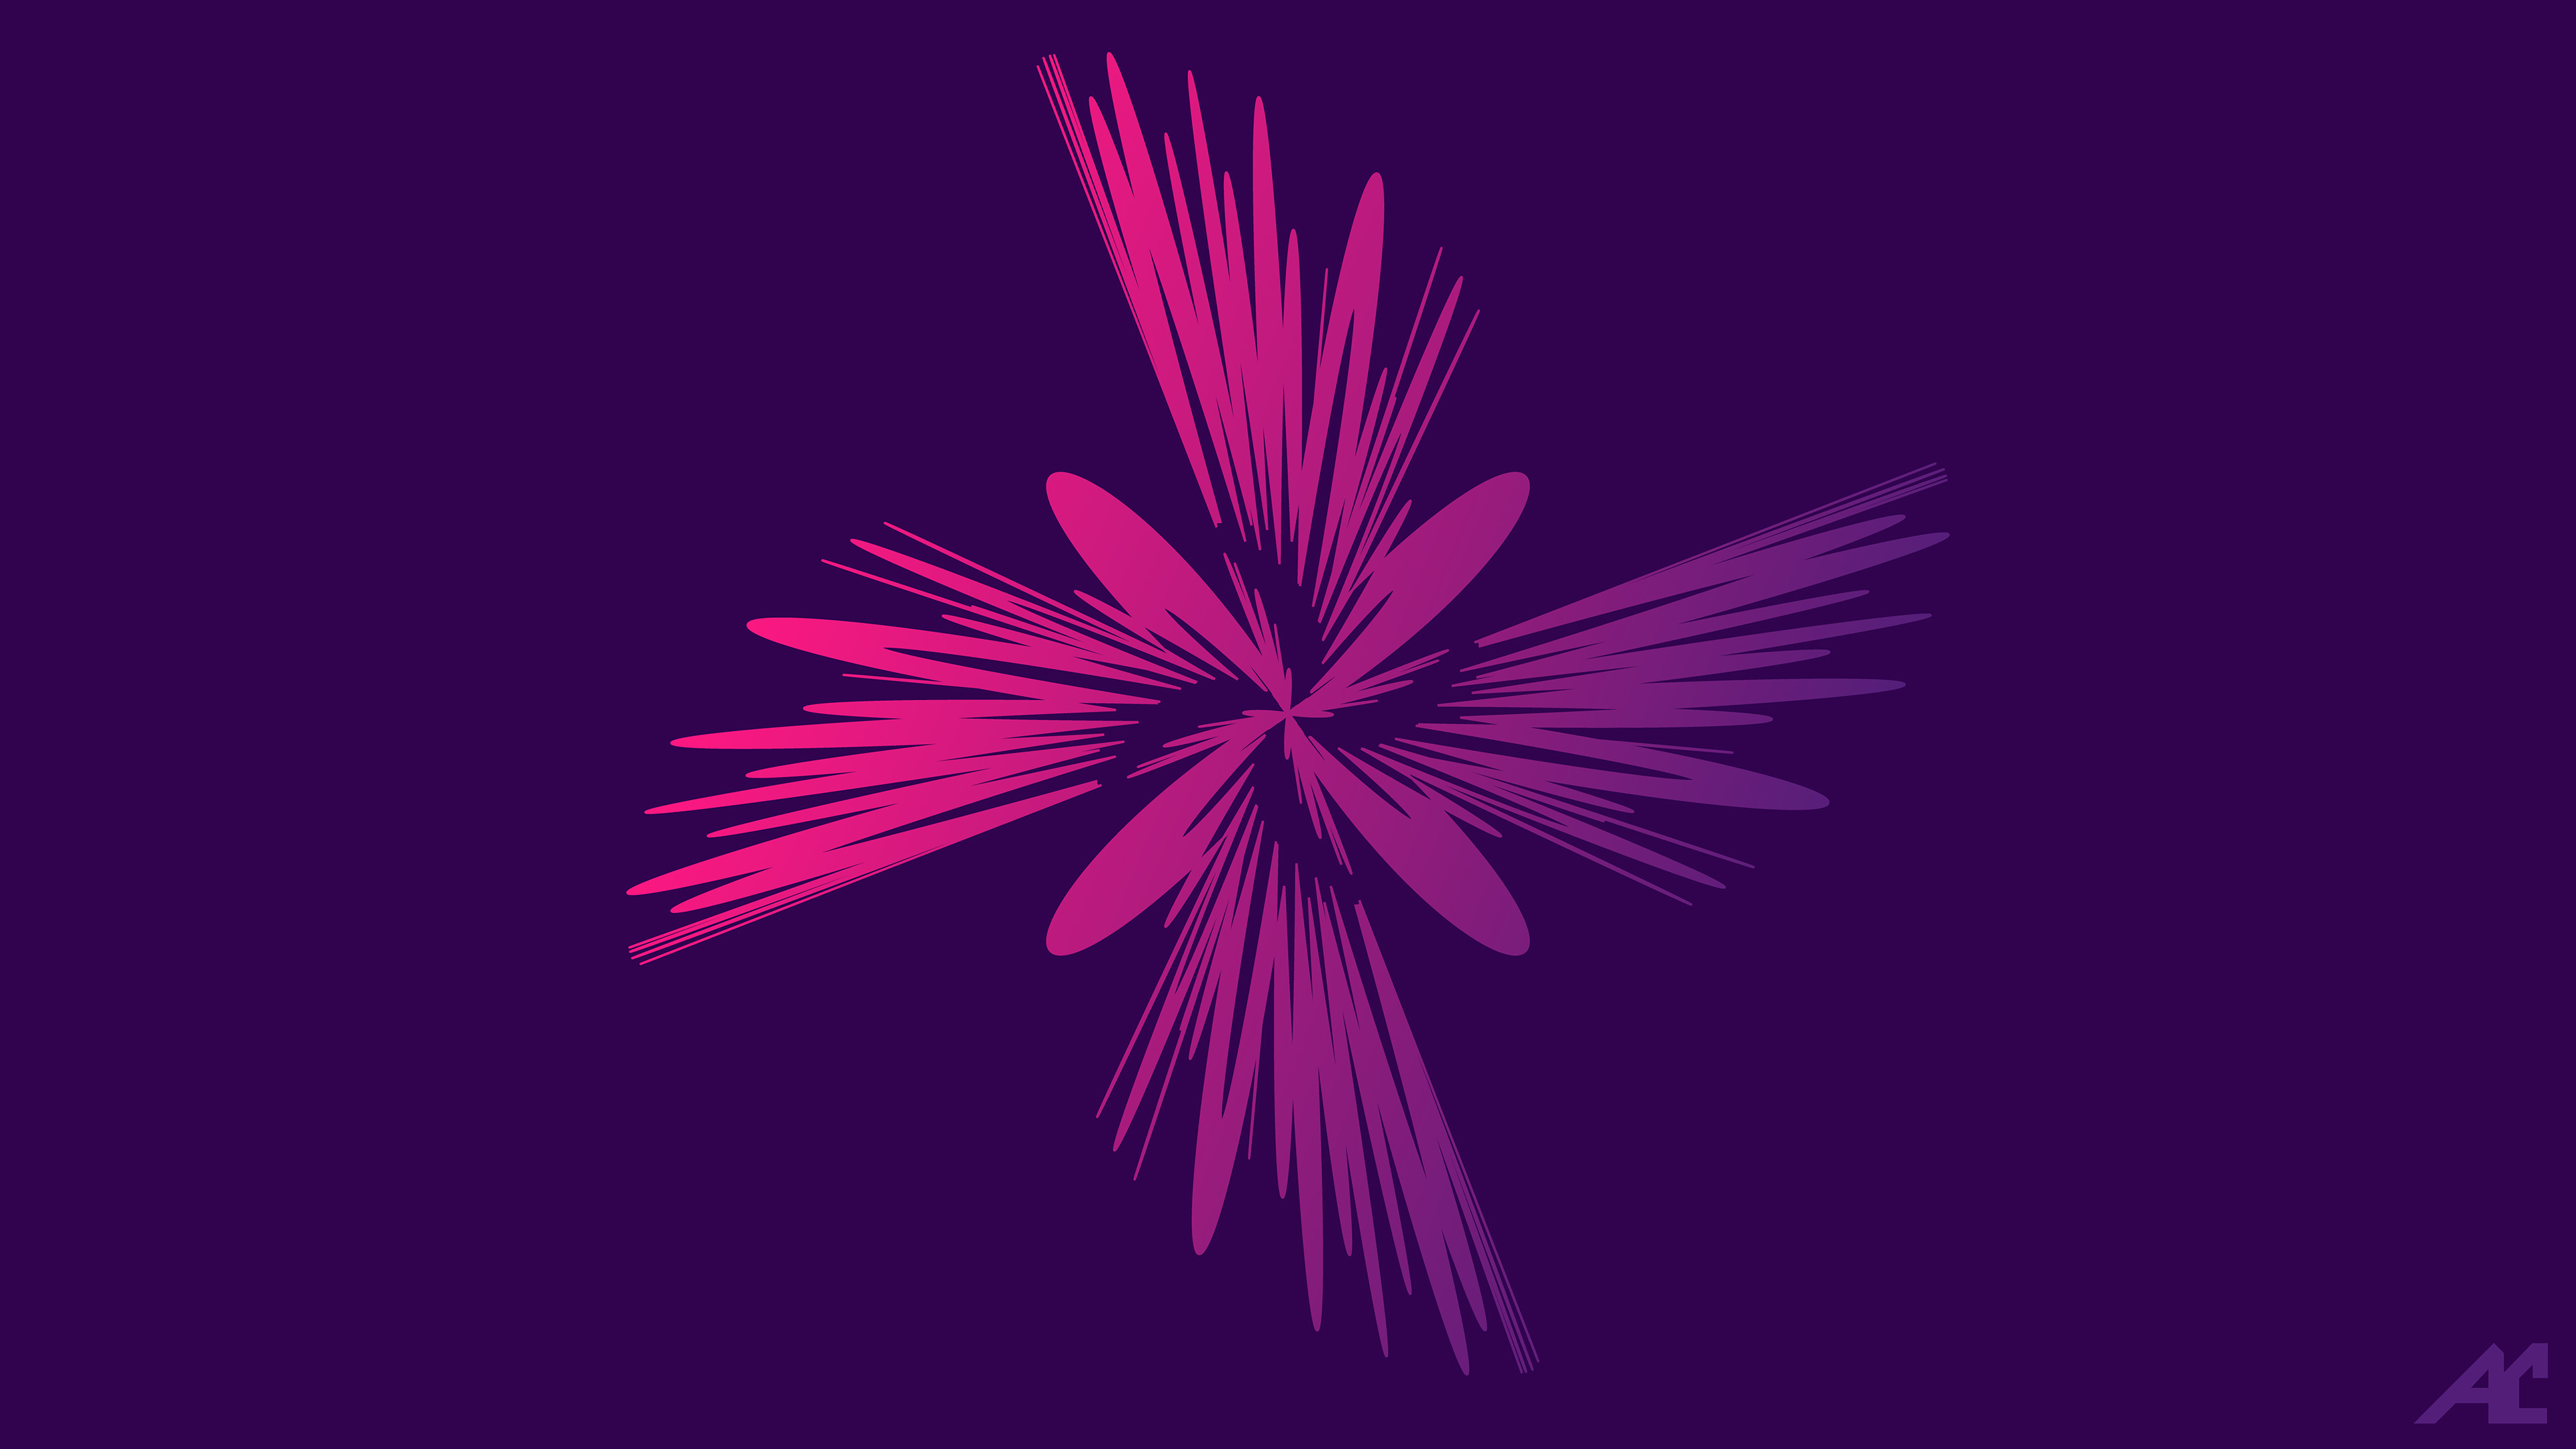 3840x2160 Flower Abstract 4k